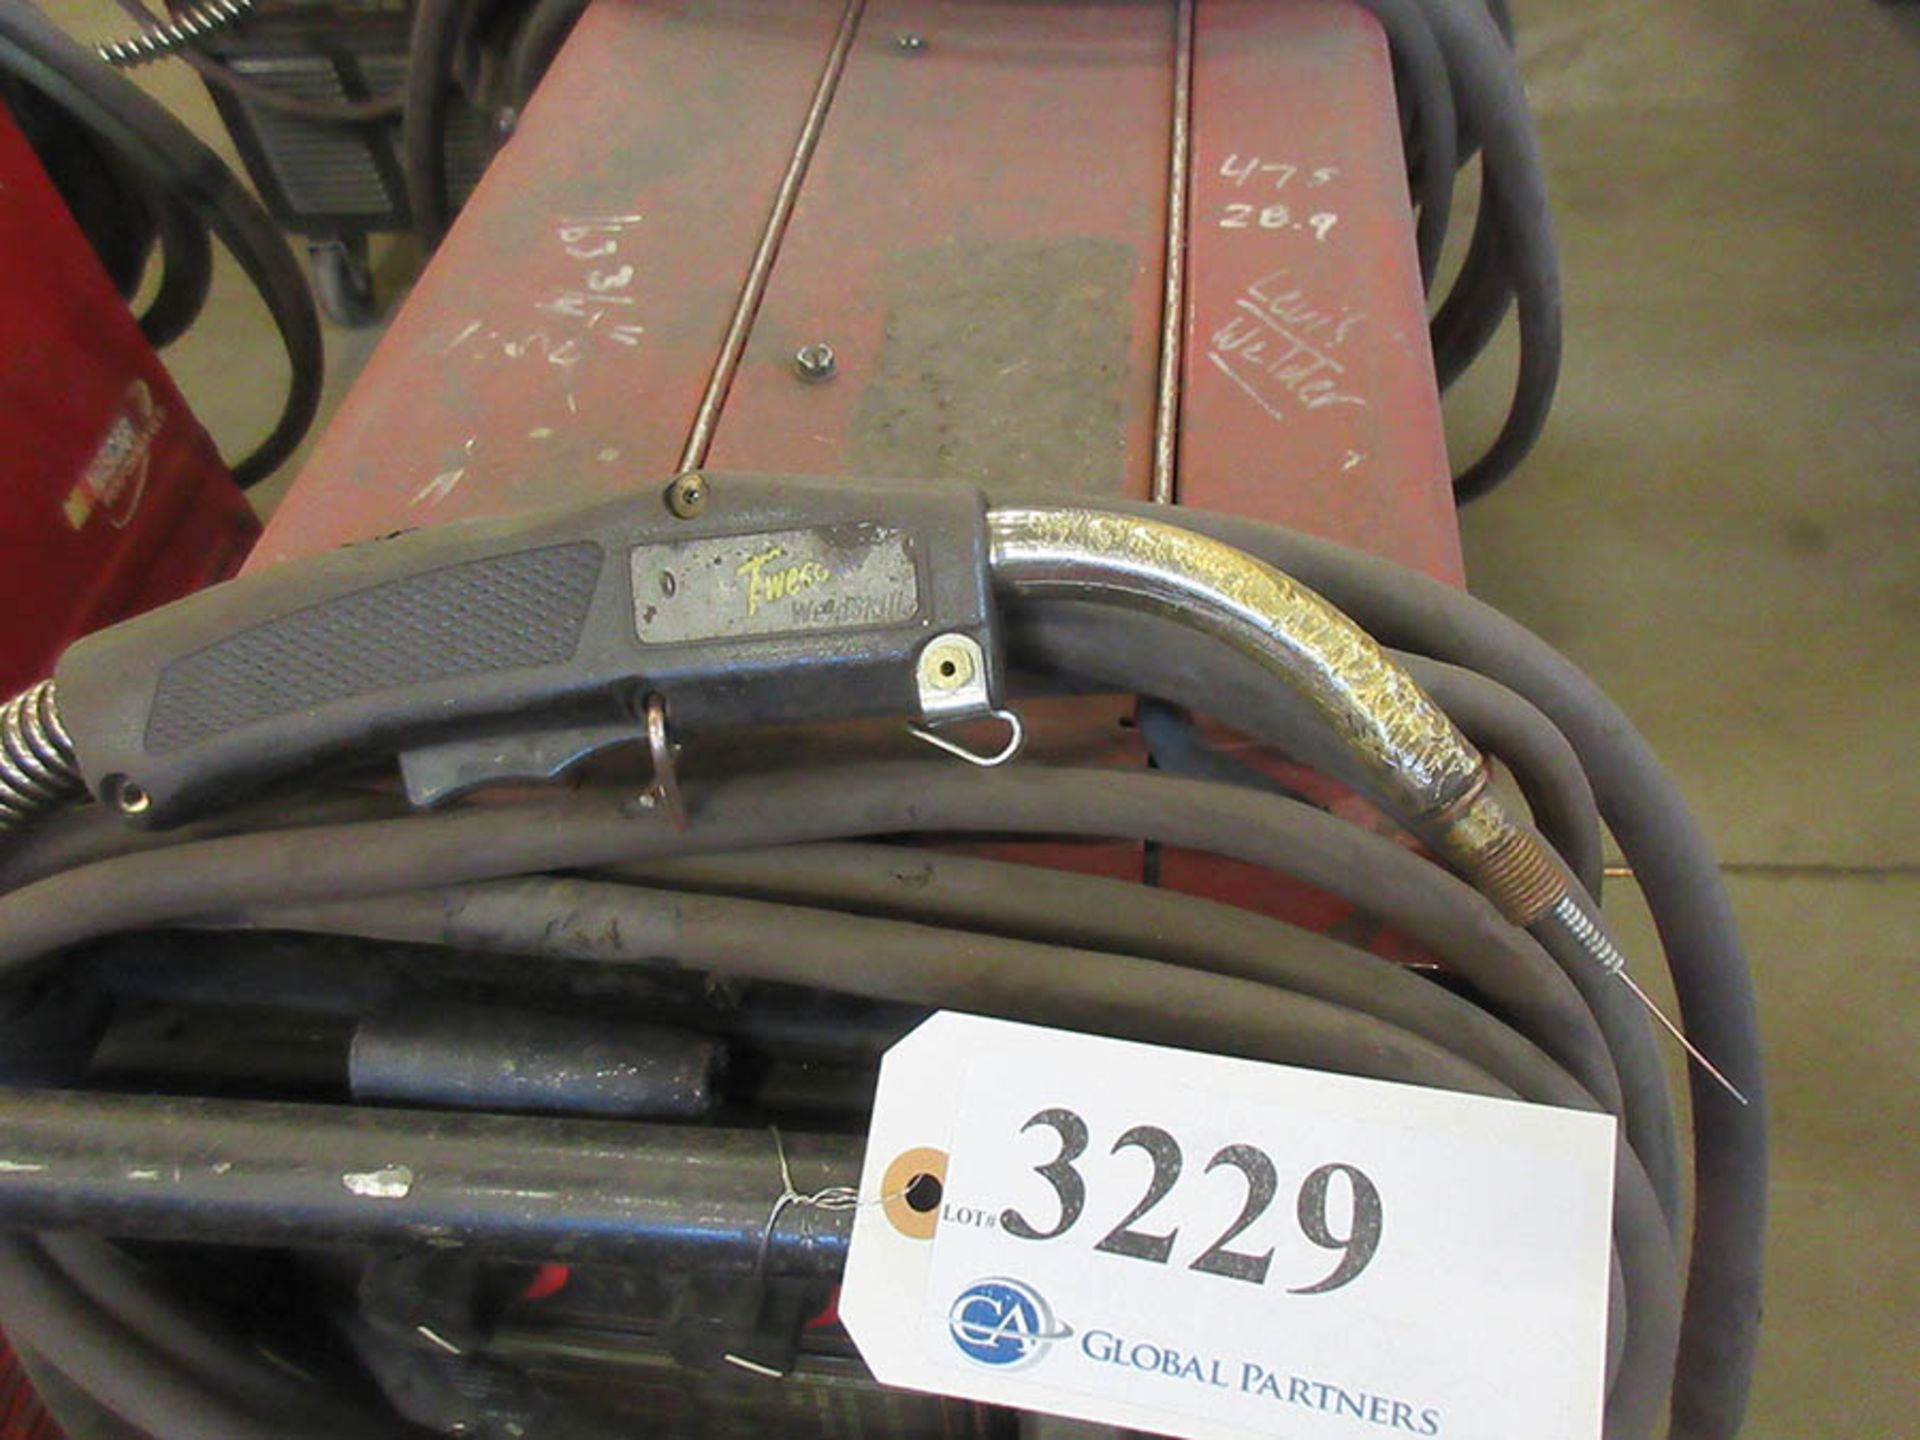 LINCOLN ELECTRIC 350MP POWER MIG WELDER WITH TWECO WELDSKILL MIG GUN, #27 - Image 3 of 3